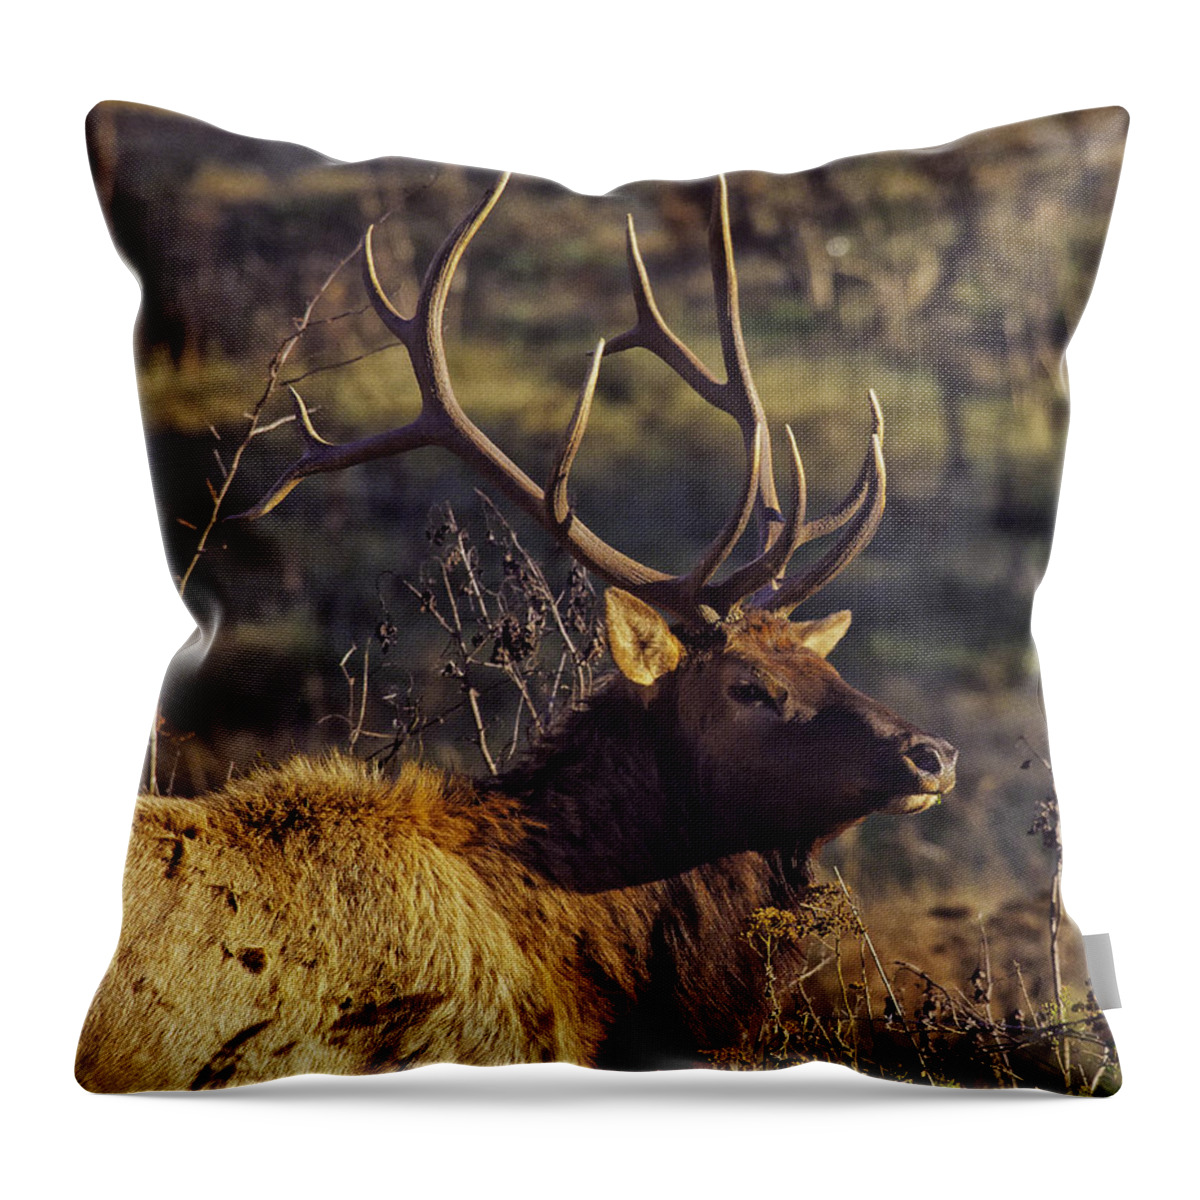 Bull Elk Throw Pillow featuring the photograph Bull Elk Up Close by Michael Dougherty